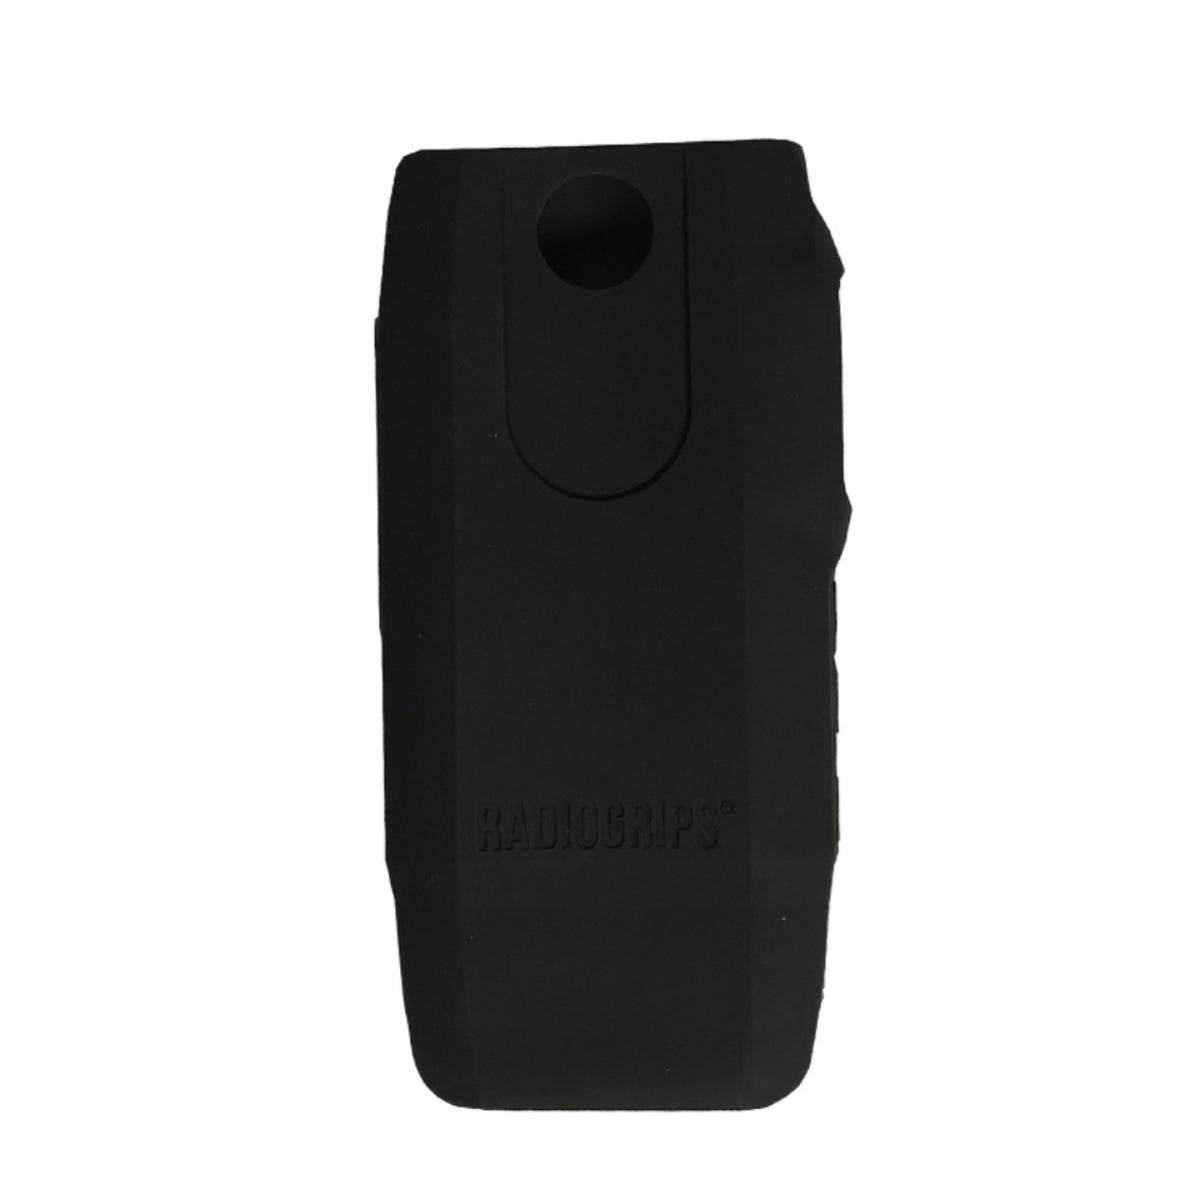 Case For Moto Telepass Kappa KS601 With Band For Sale Online 